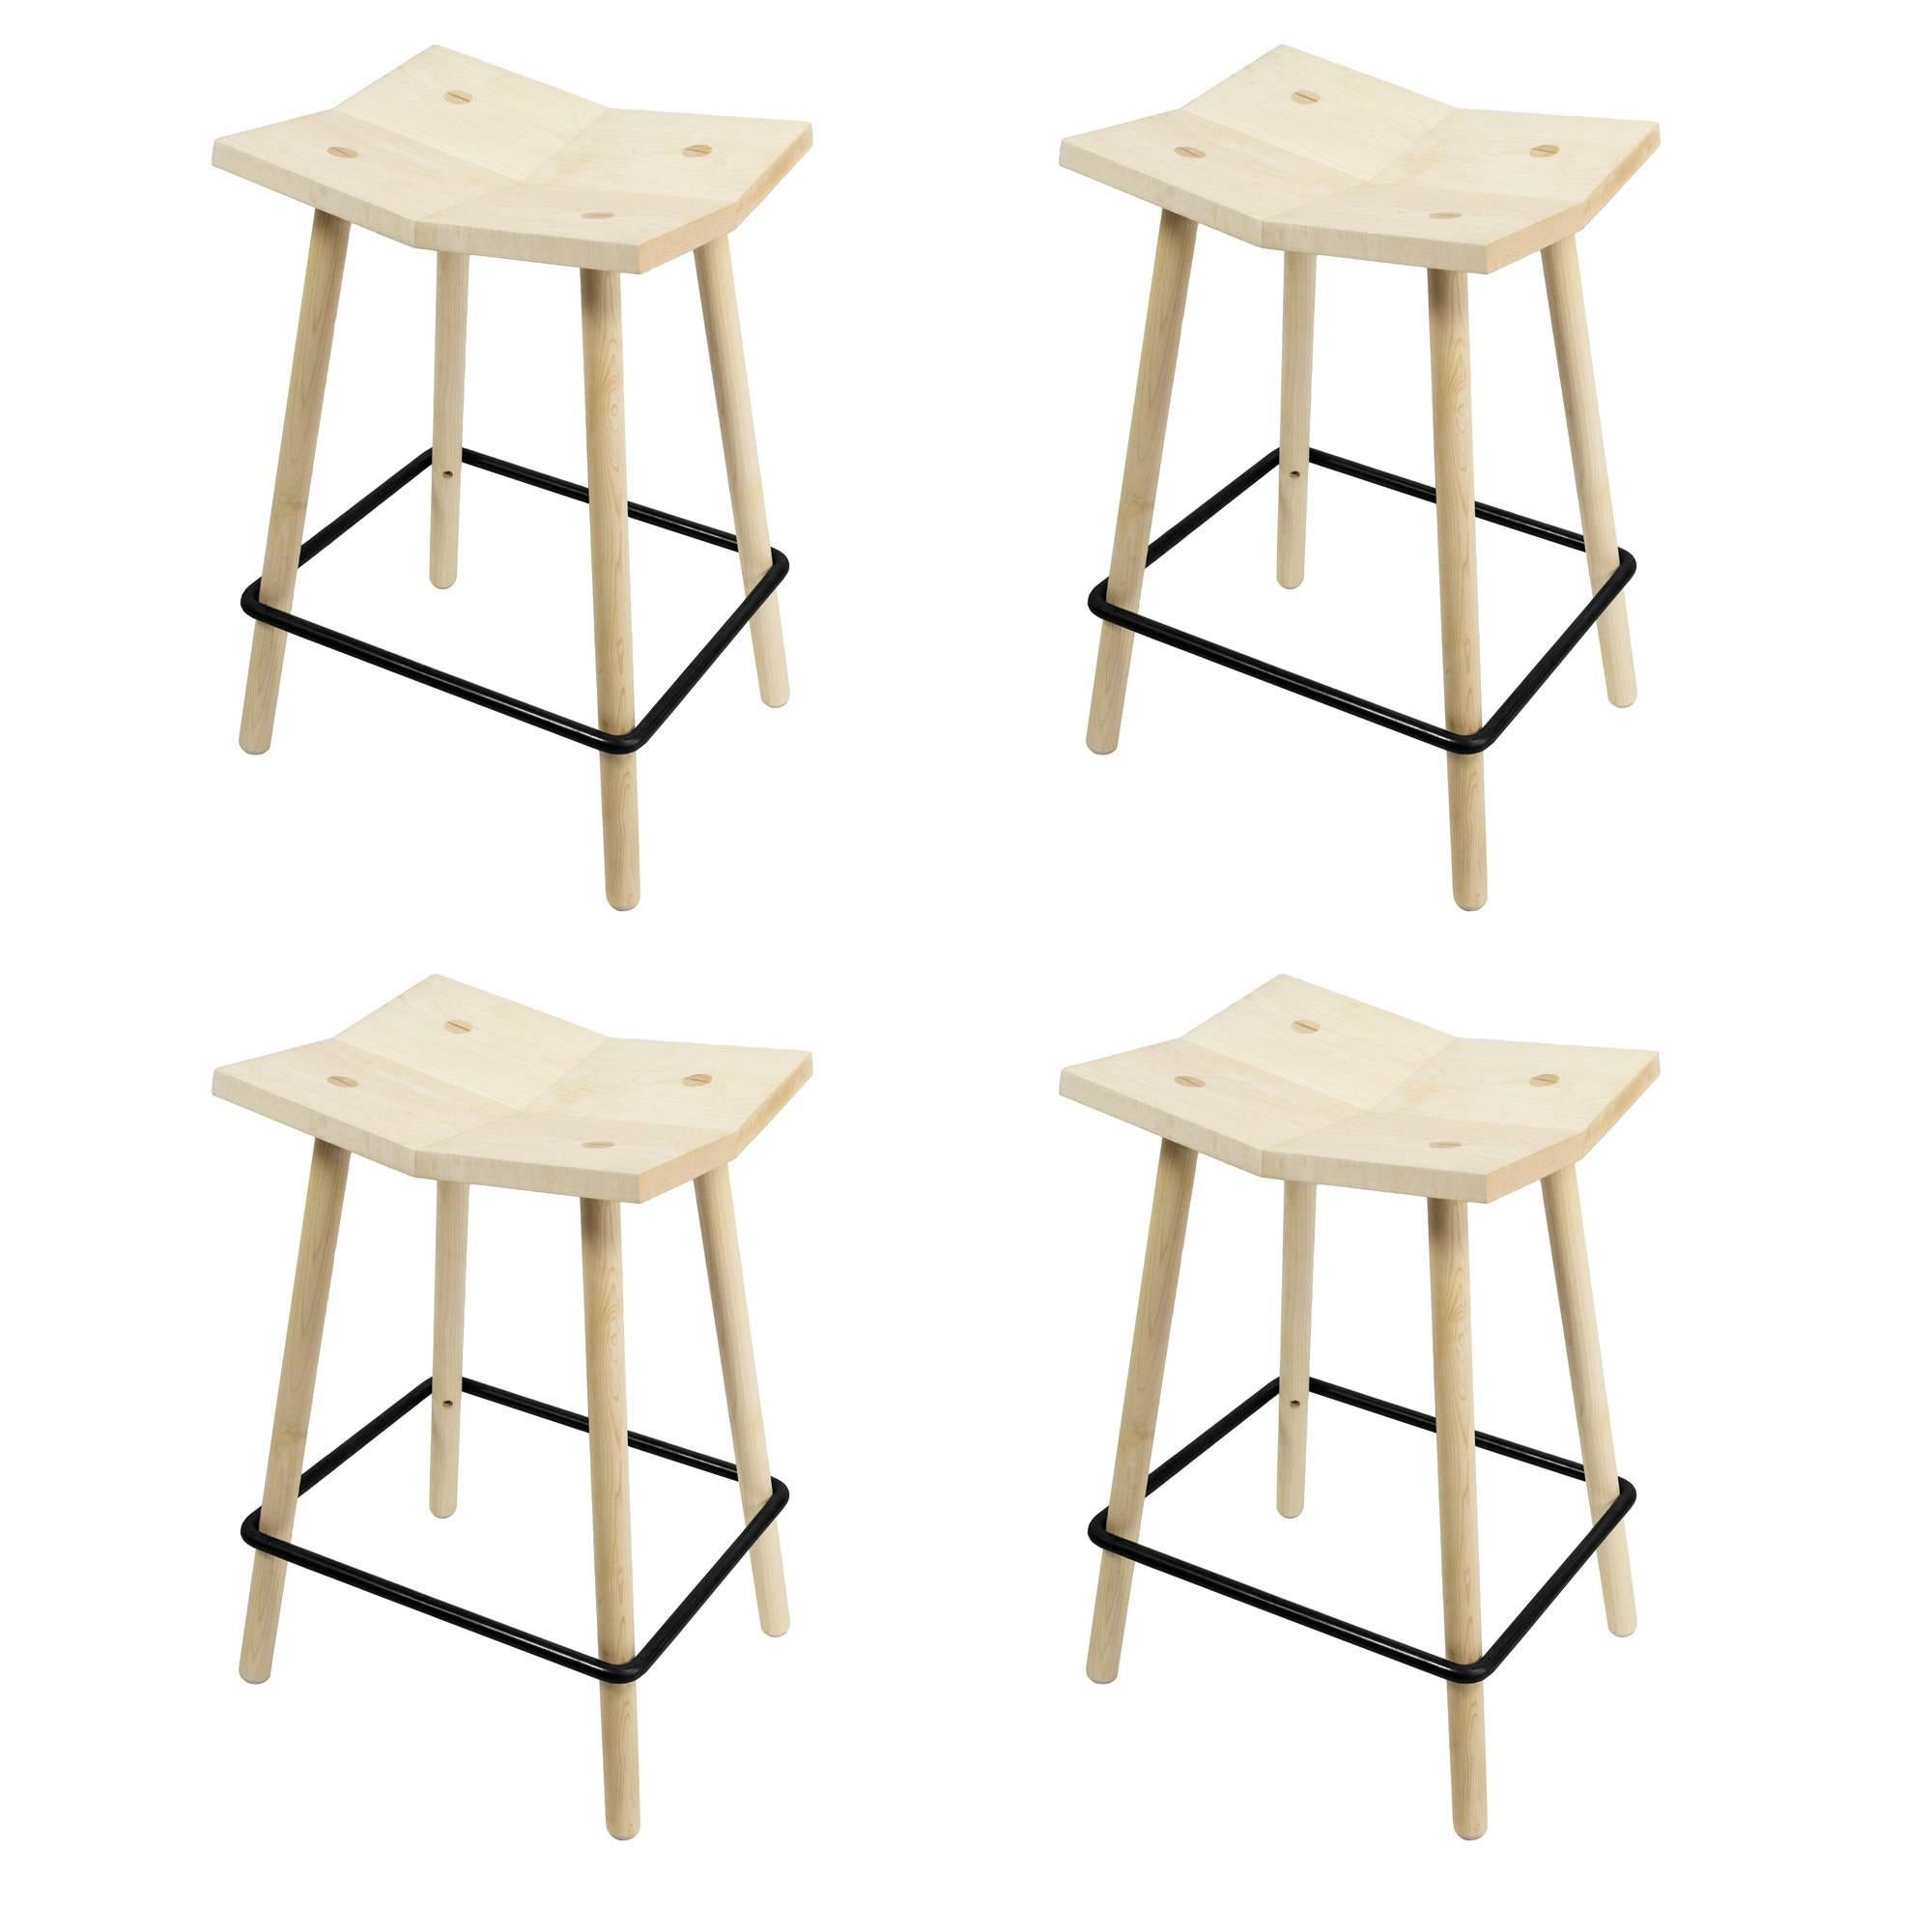 Four Mitre Counter Stools, Natural Maple Bar Stools